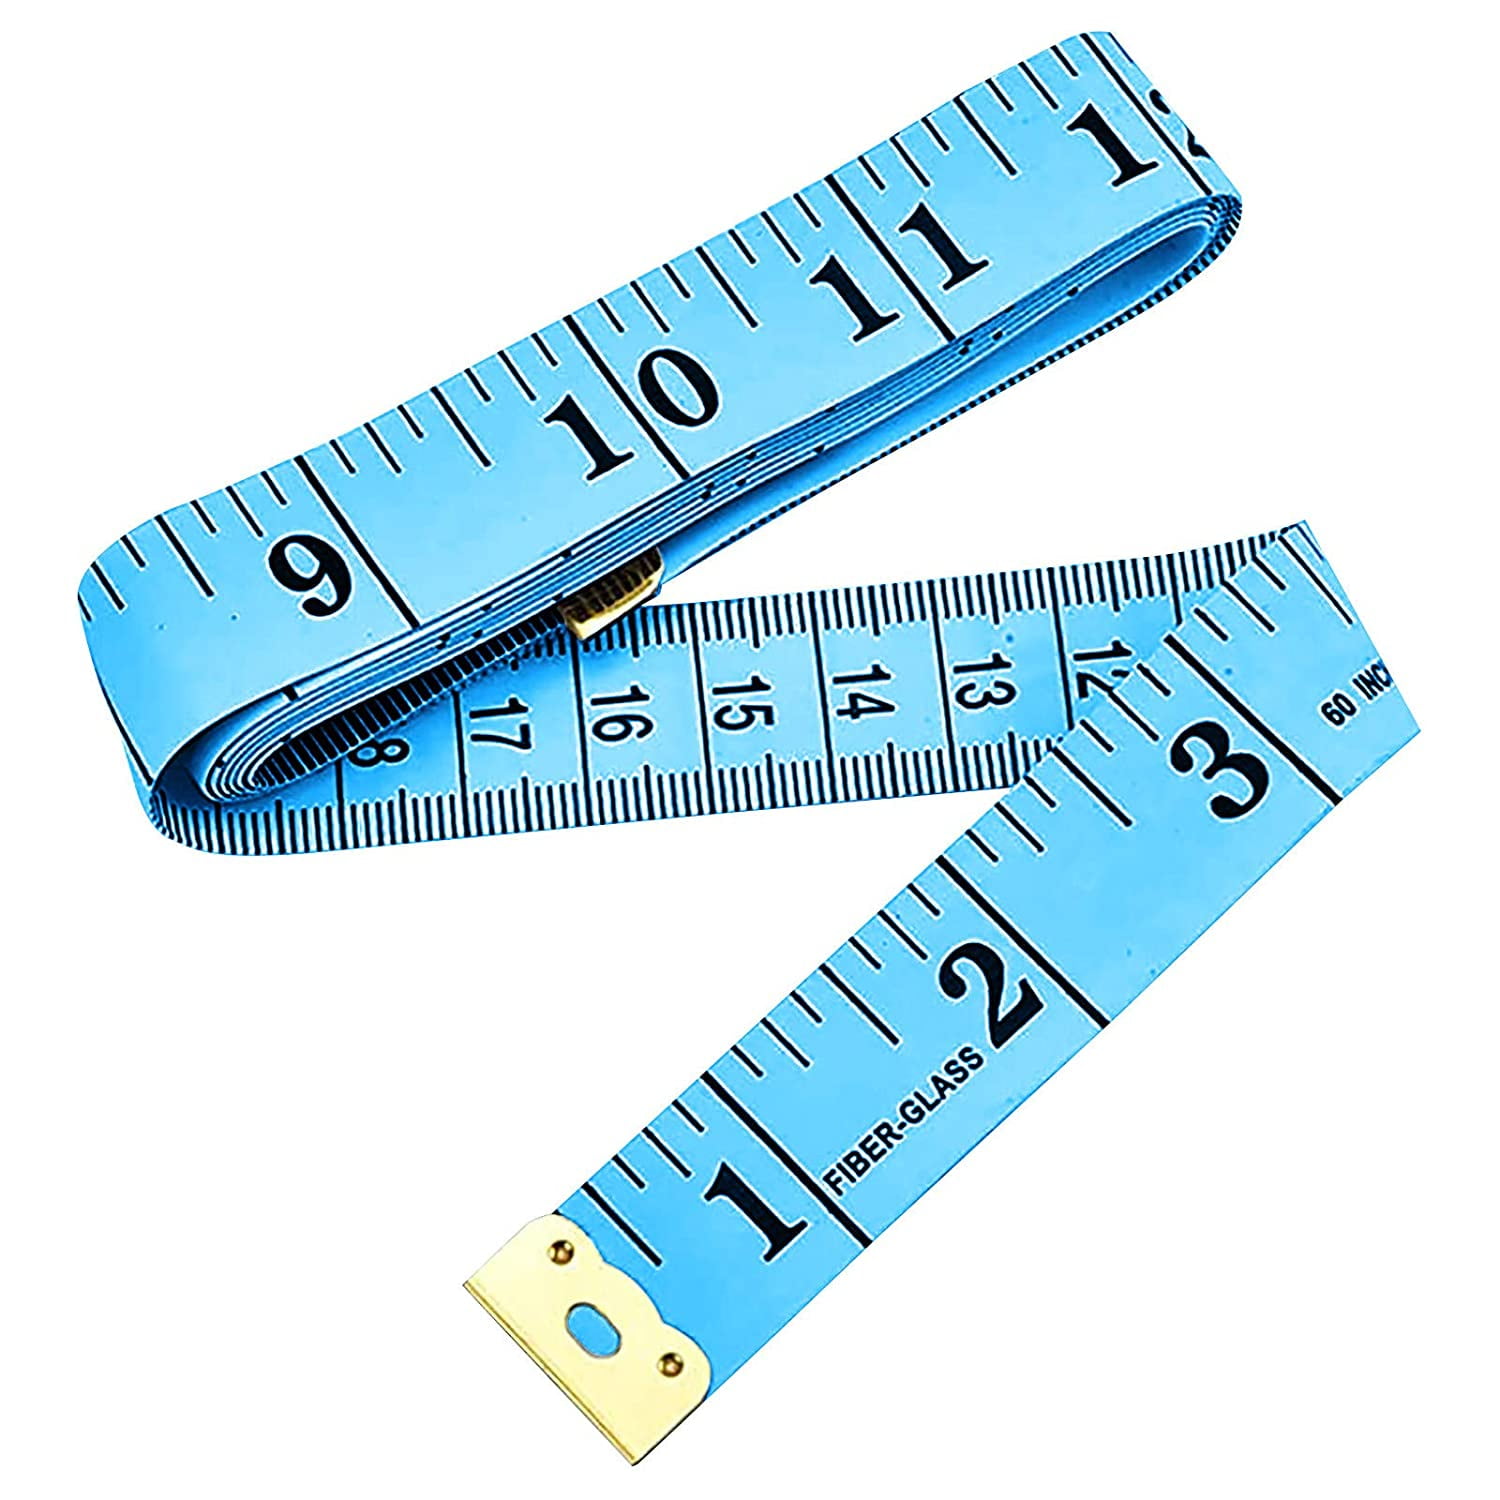 GZ Sewing Tape Measure Leather Retractable Body Measuring Tape 150 cm 60  Inch Tailor Fabric Small Tape Measure with Push Button, Black (1 Pack)